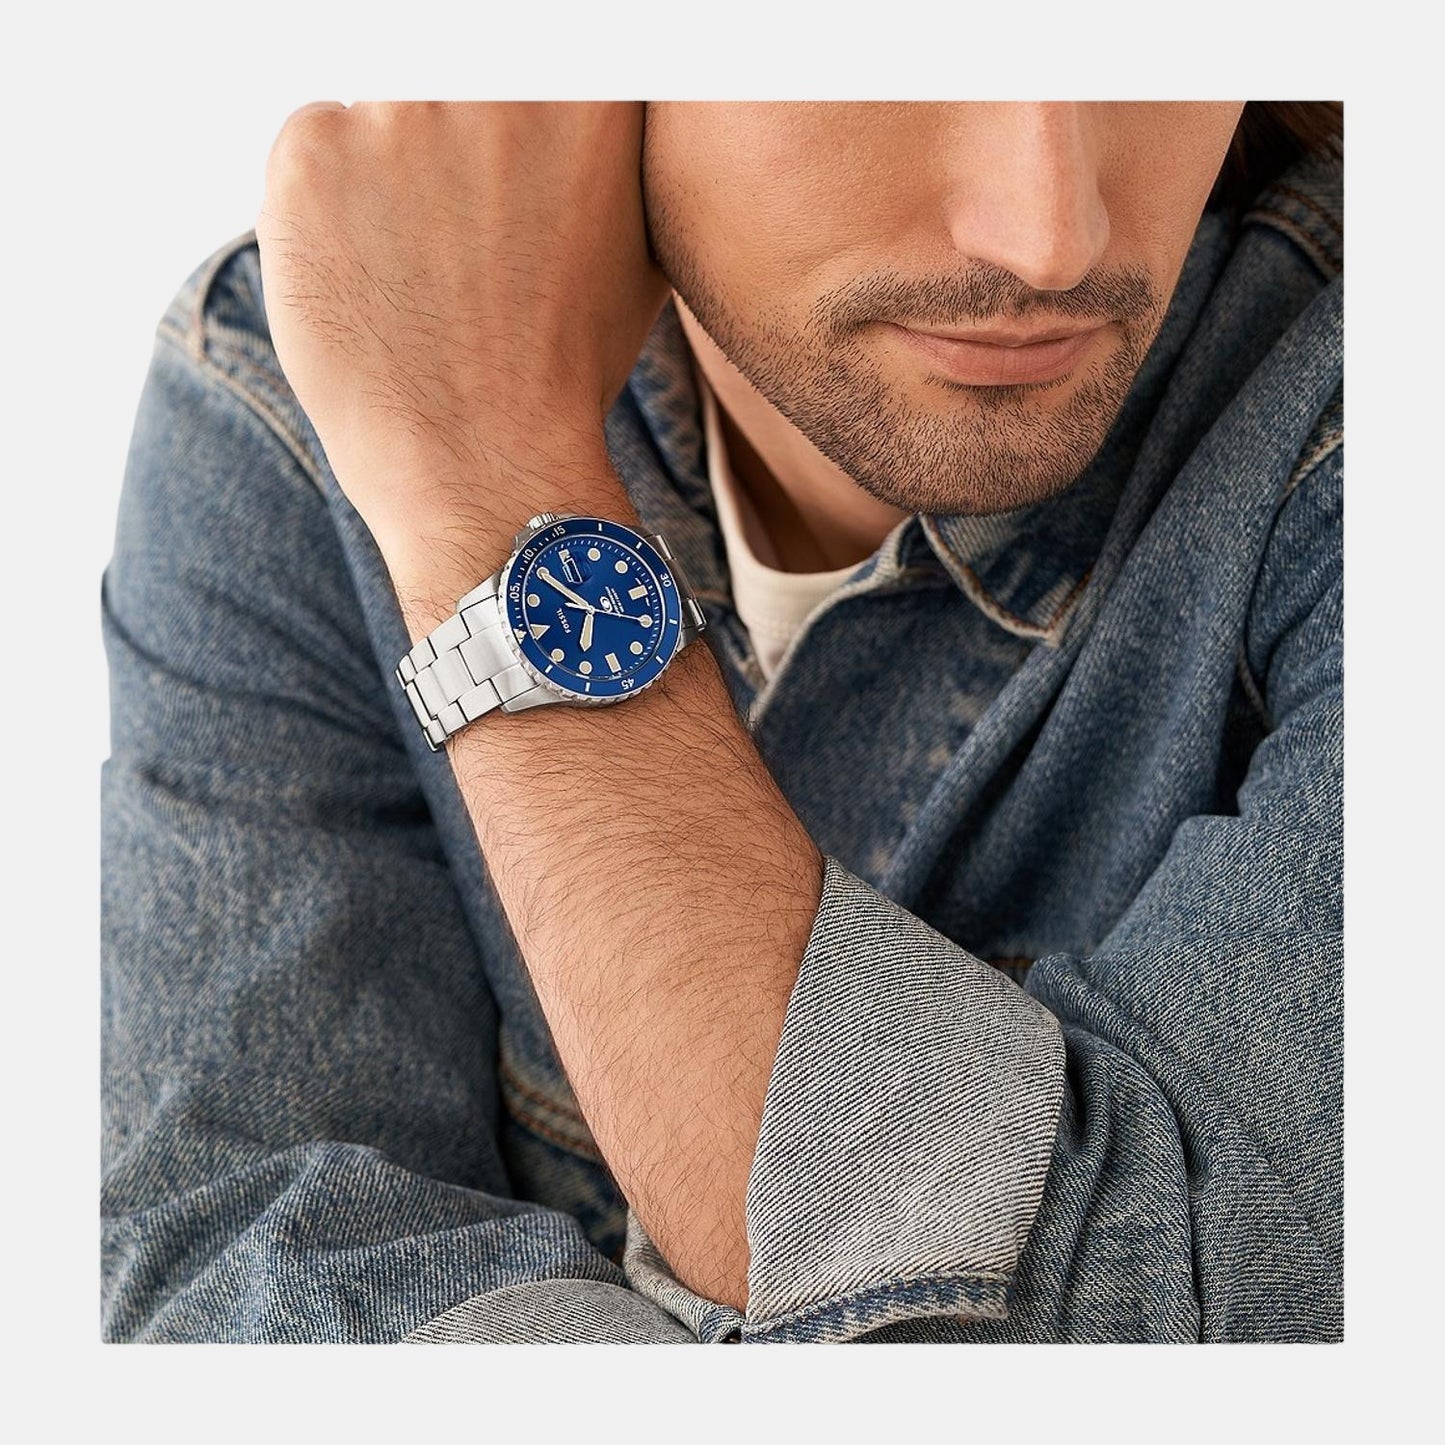 Male Blue Analog Stainless Steel Watch FS5949